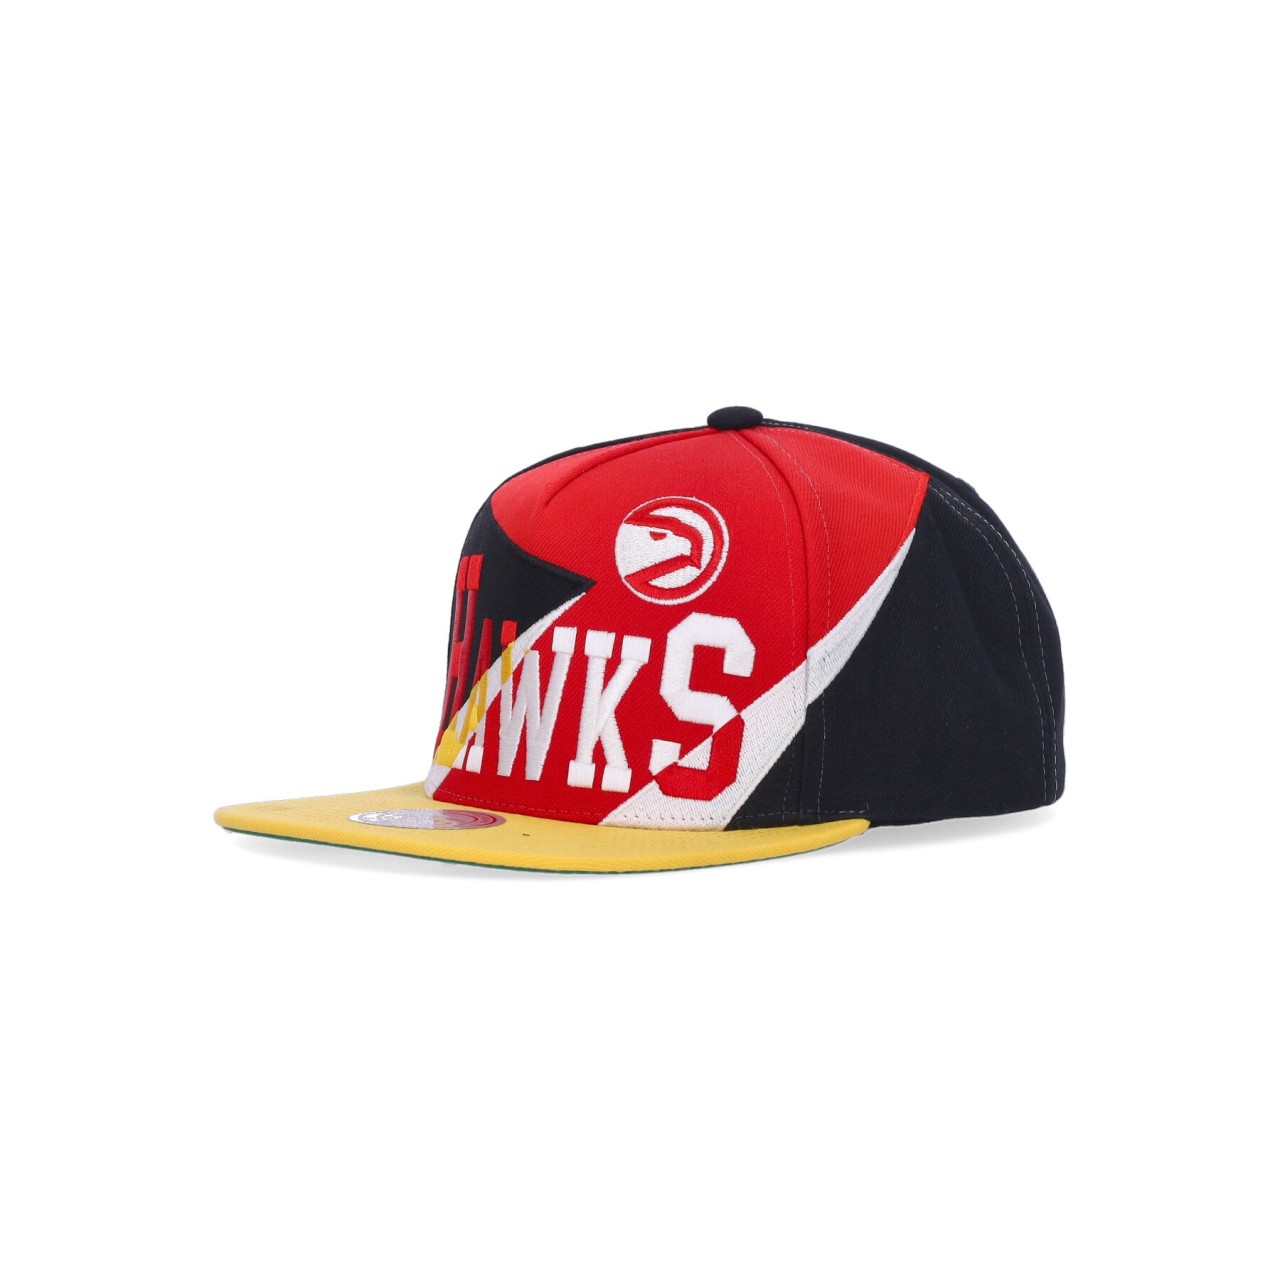 MITCHELL & NESS NBA MULTIPLY HWC SNAPBACK ATLHAW HHSS4320-AHAYYPPPRED1